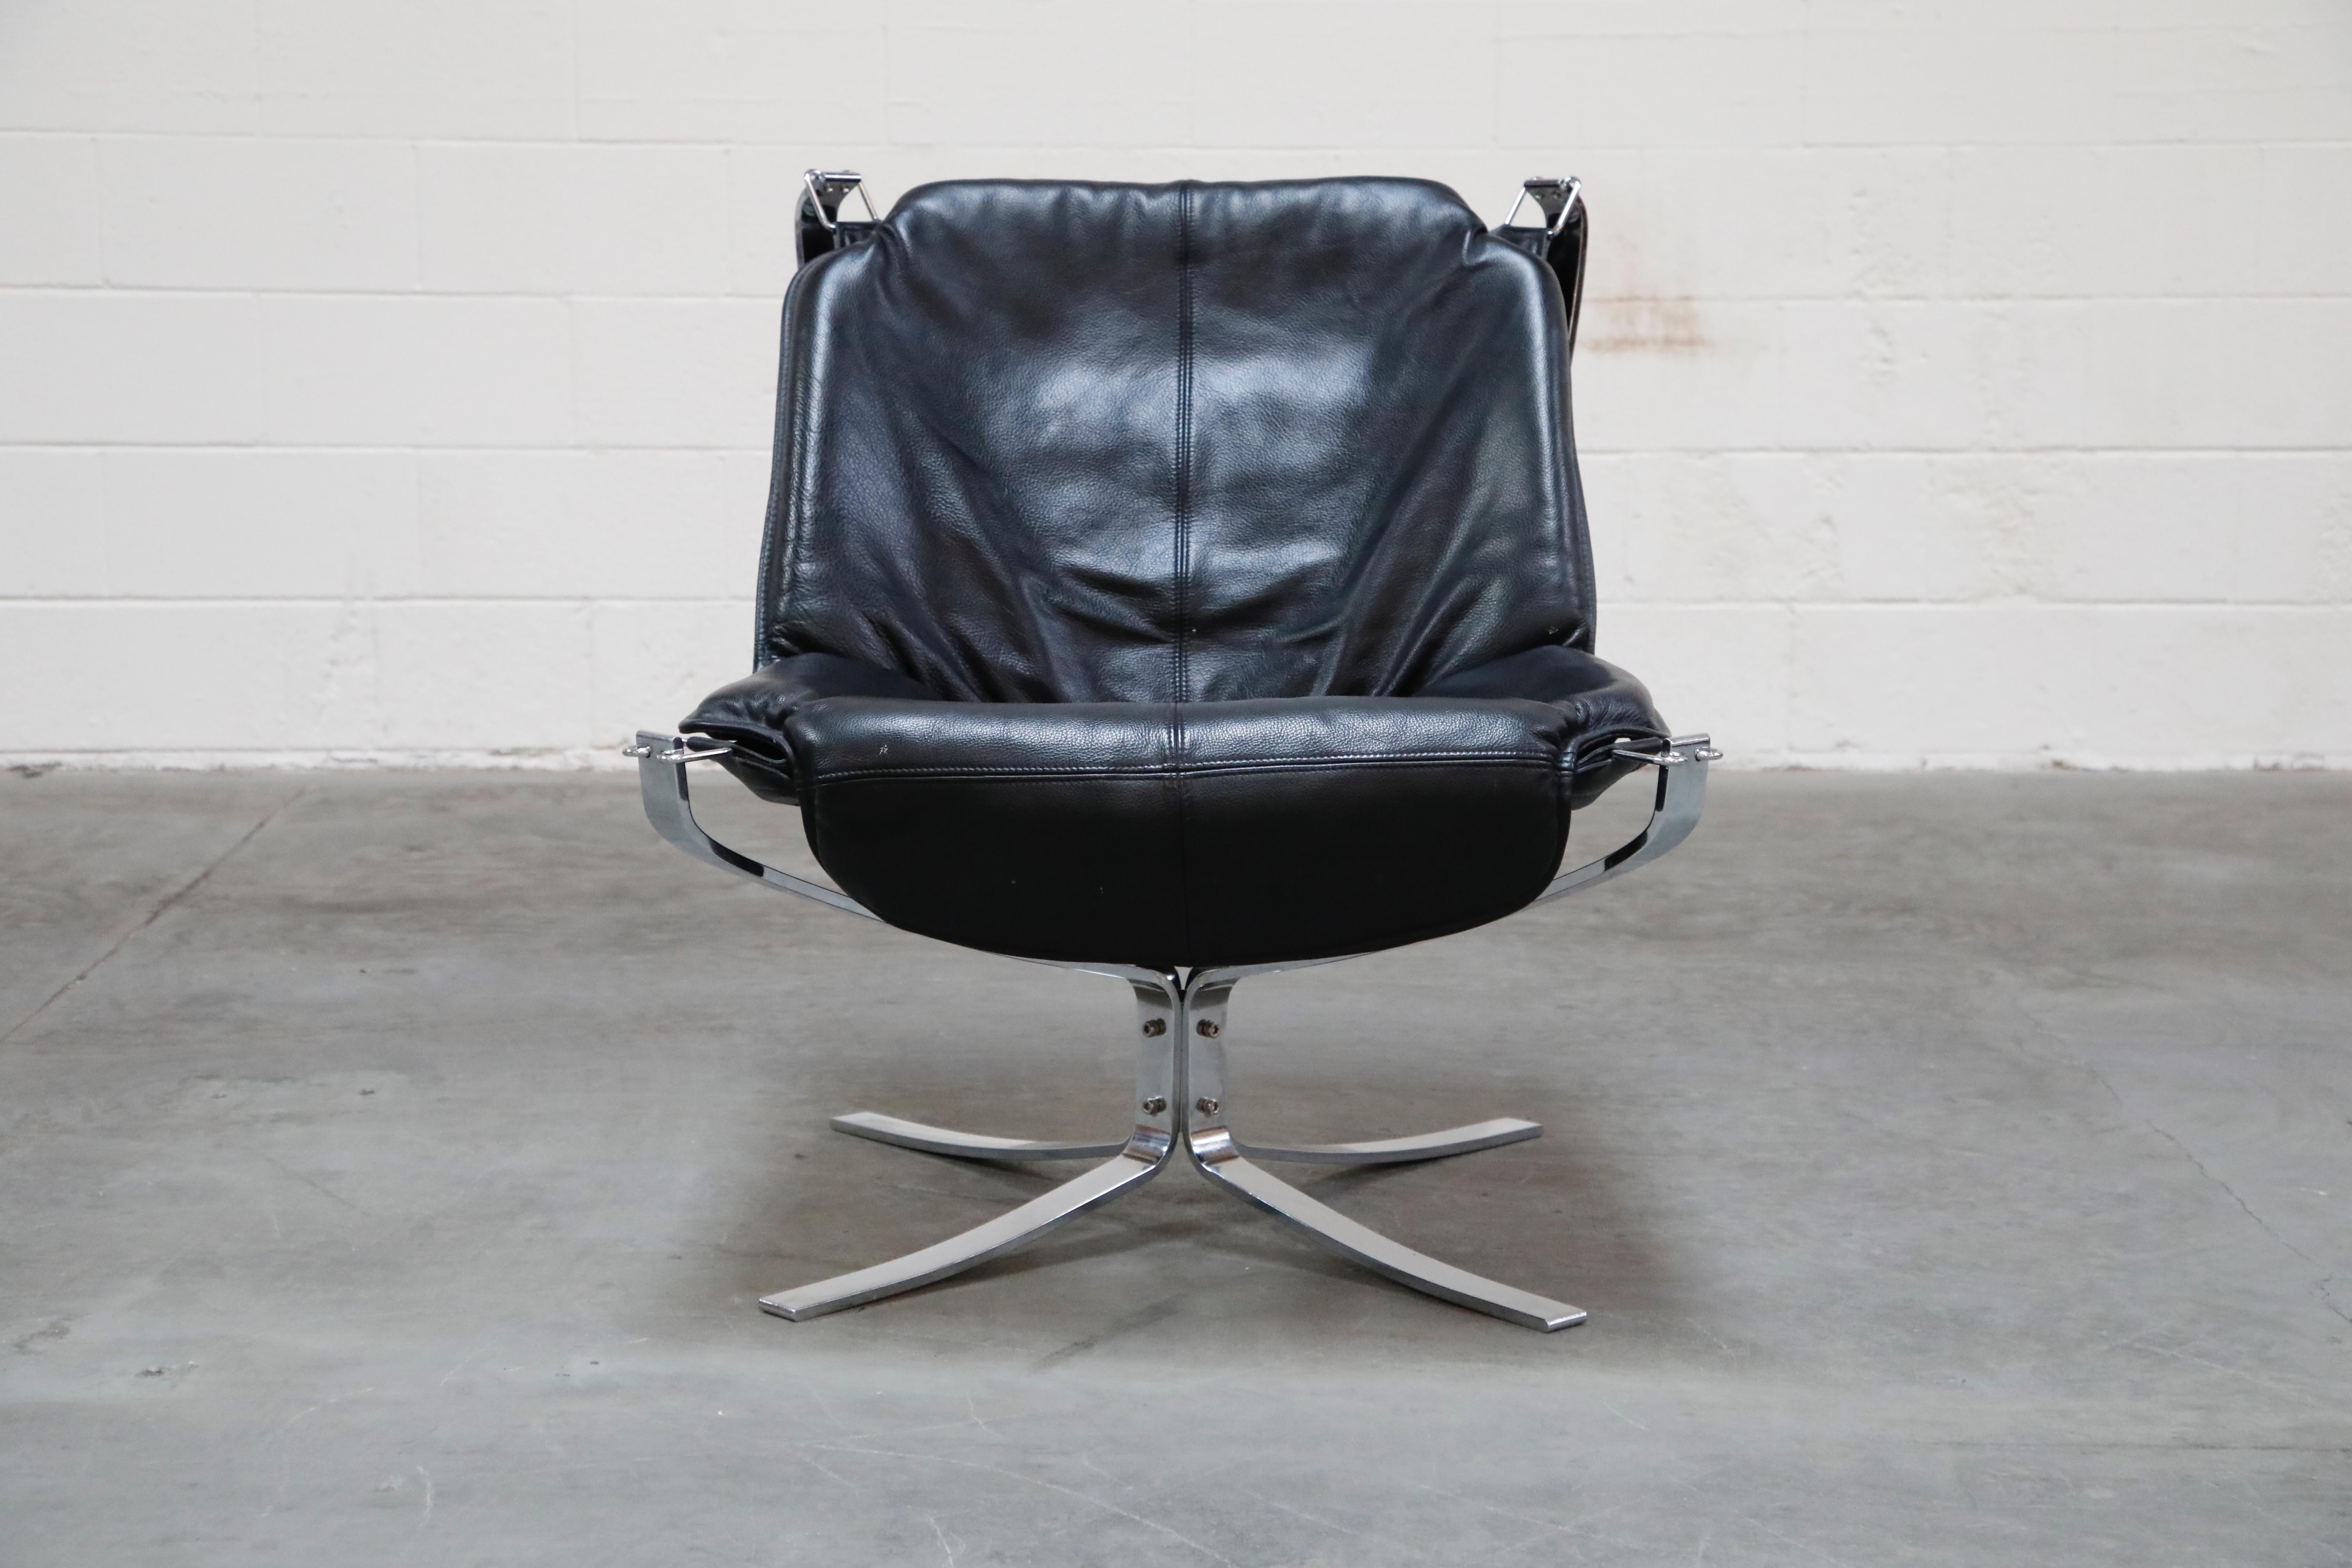 Classy yet casual, this falcon lounge chair designed by Sigurd Ressell is in excellent condition. This iconic example of Norwegian design features a chrome flat bar X-base frame with black leather seats supported by a suspended sling, similar to a